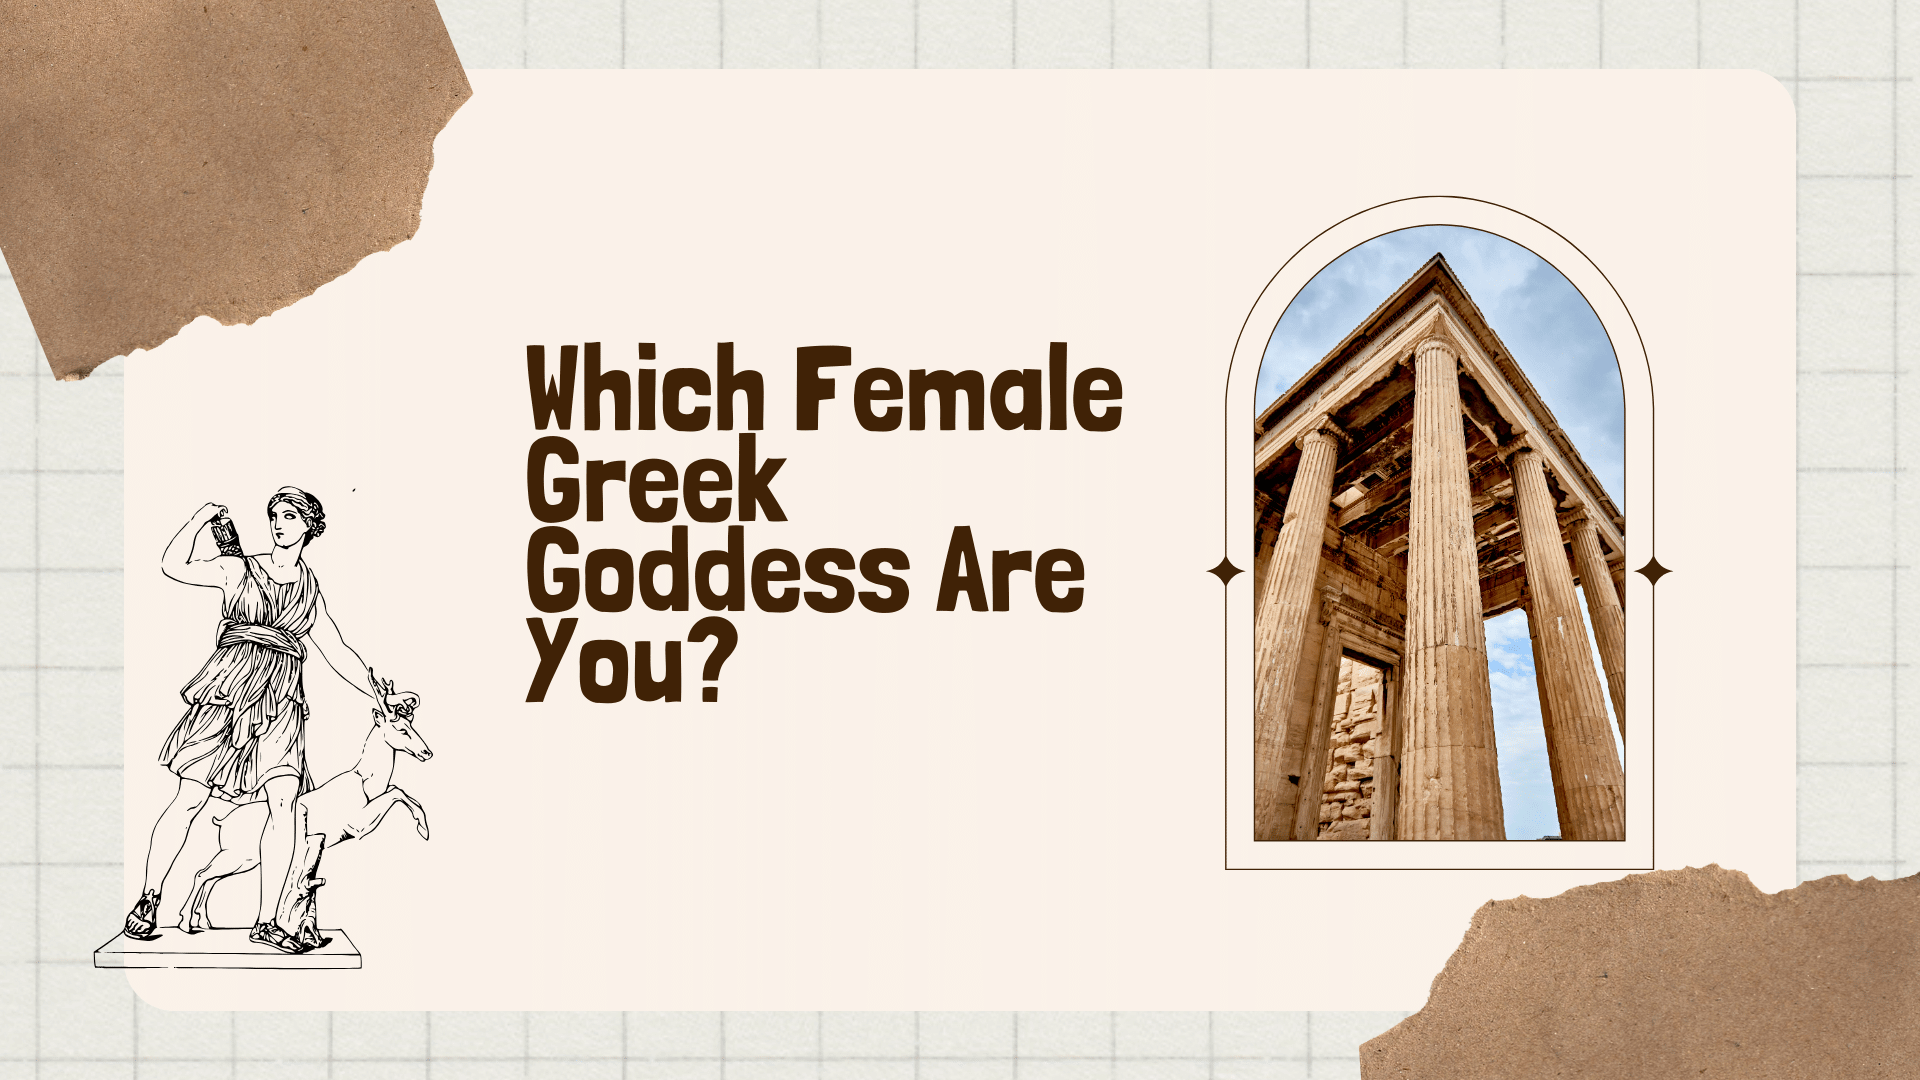 Which Female Greek Goddess Are You?